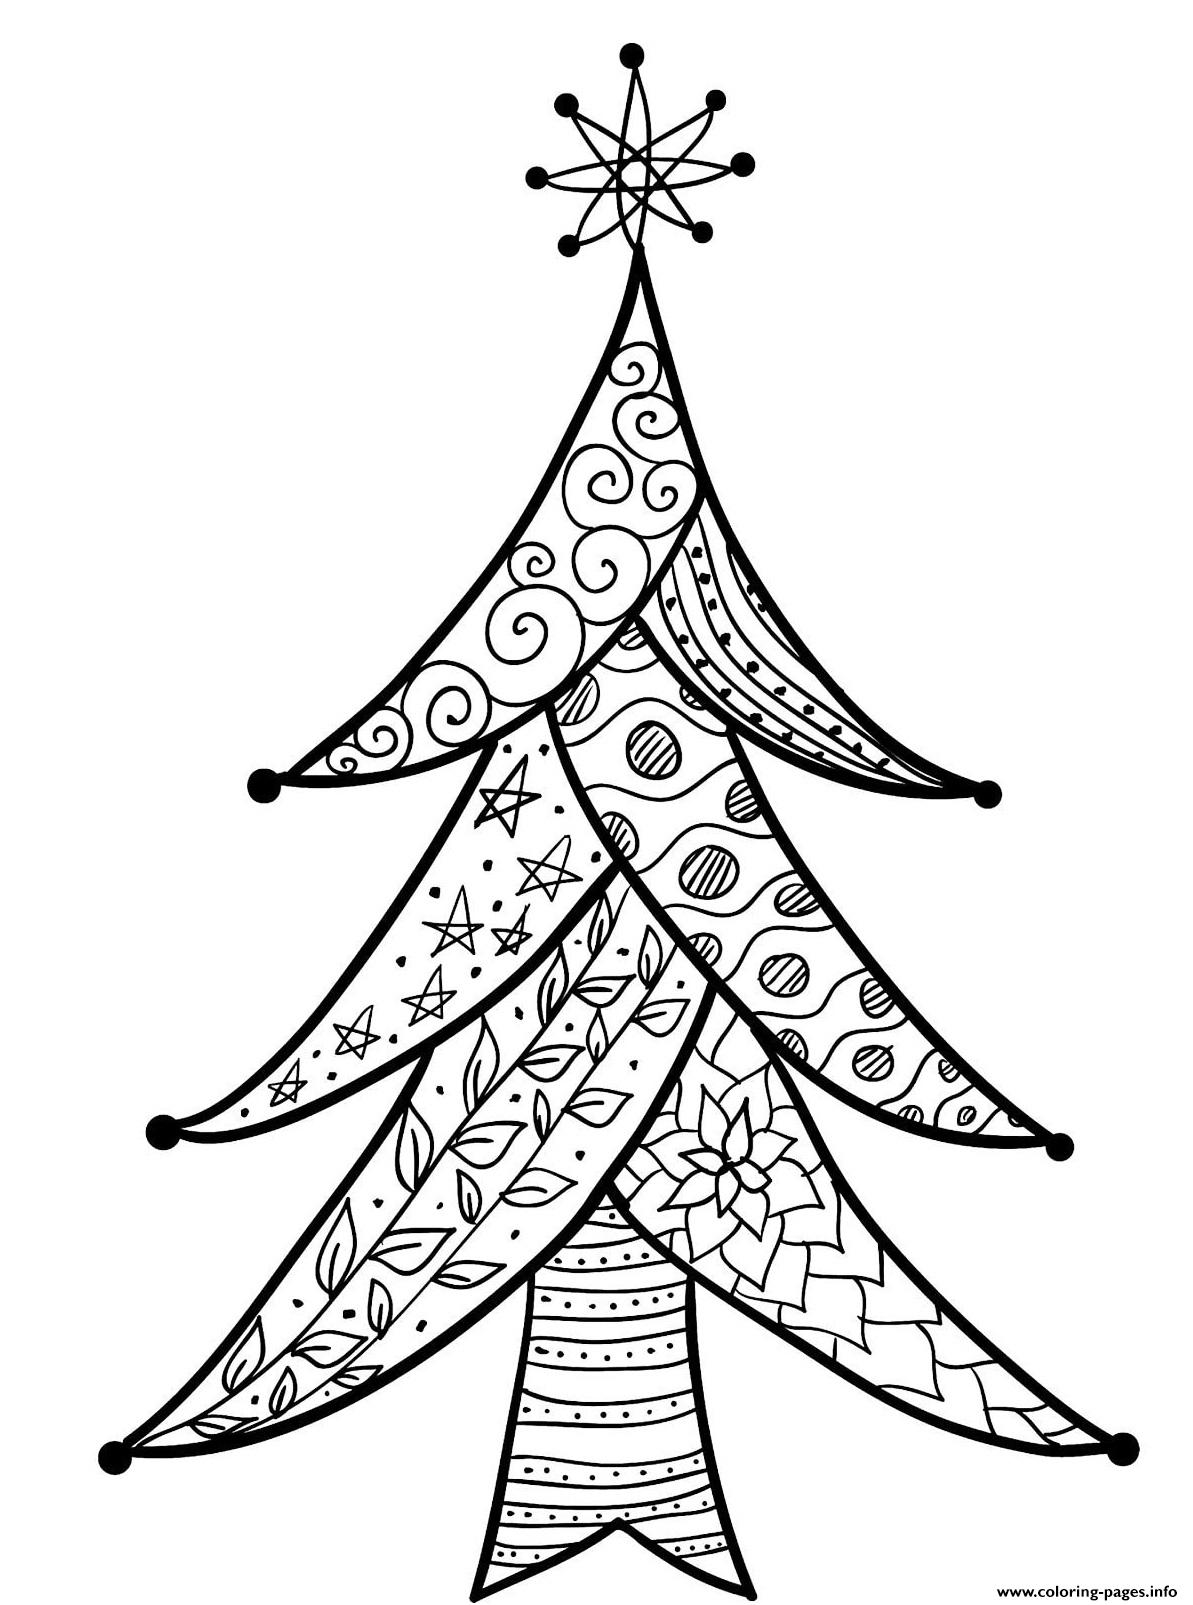 Pretty Patterns On A Christmas Tree Coloring Pages Printable